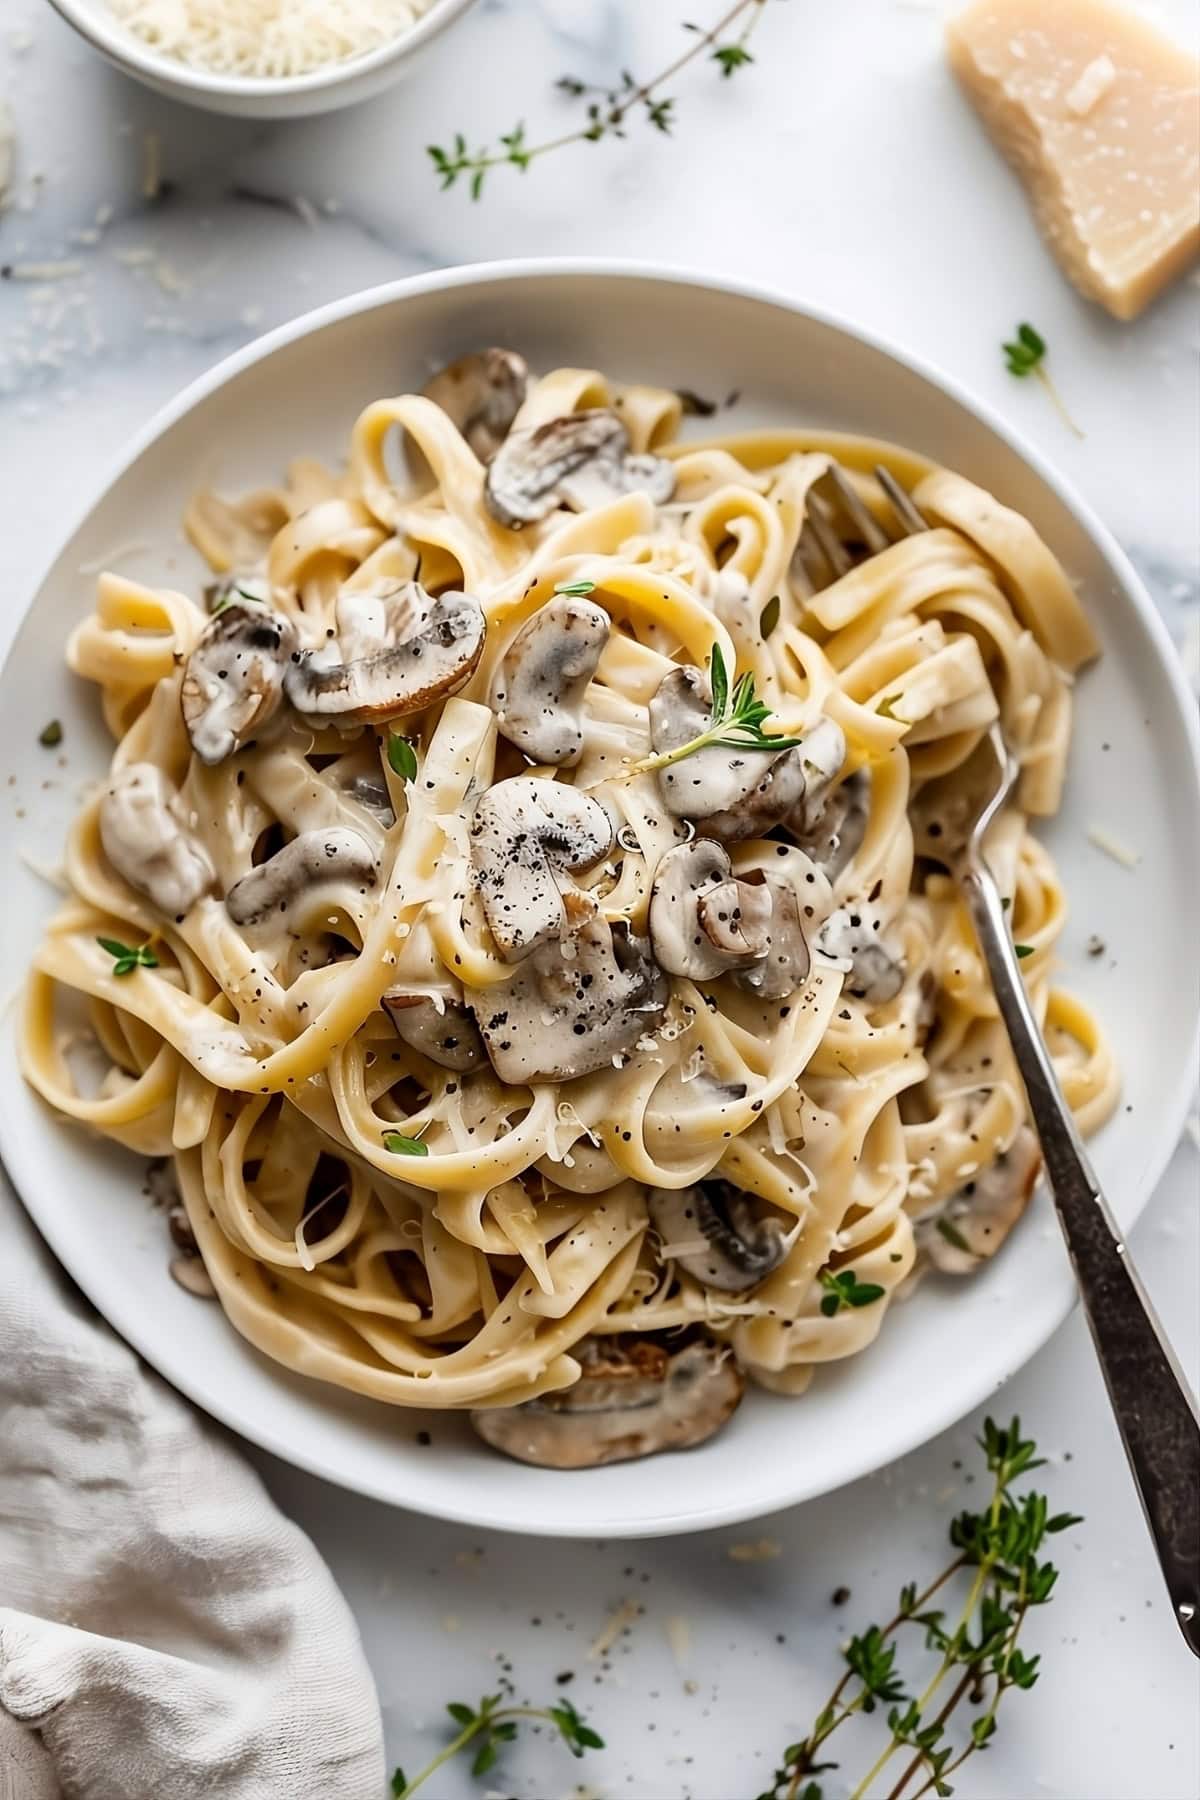 Serving of creamy mushroom pasta in a white plate with fork.